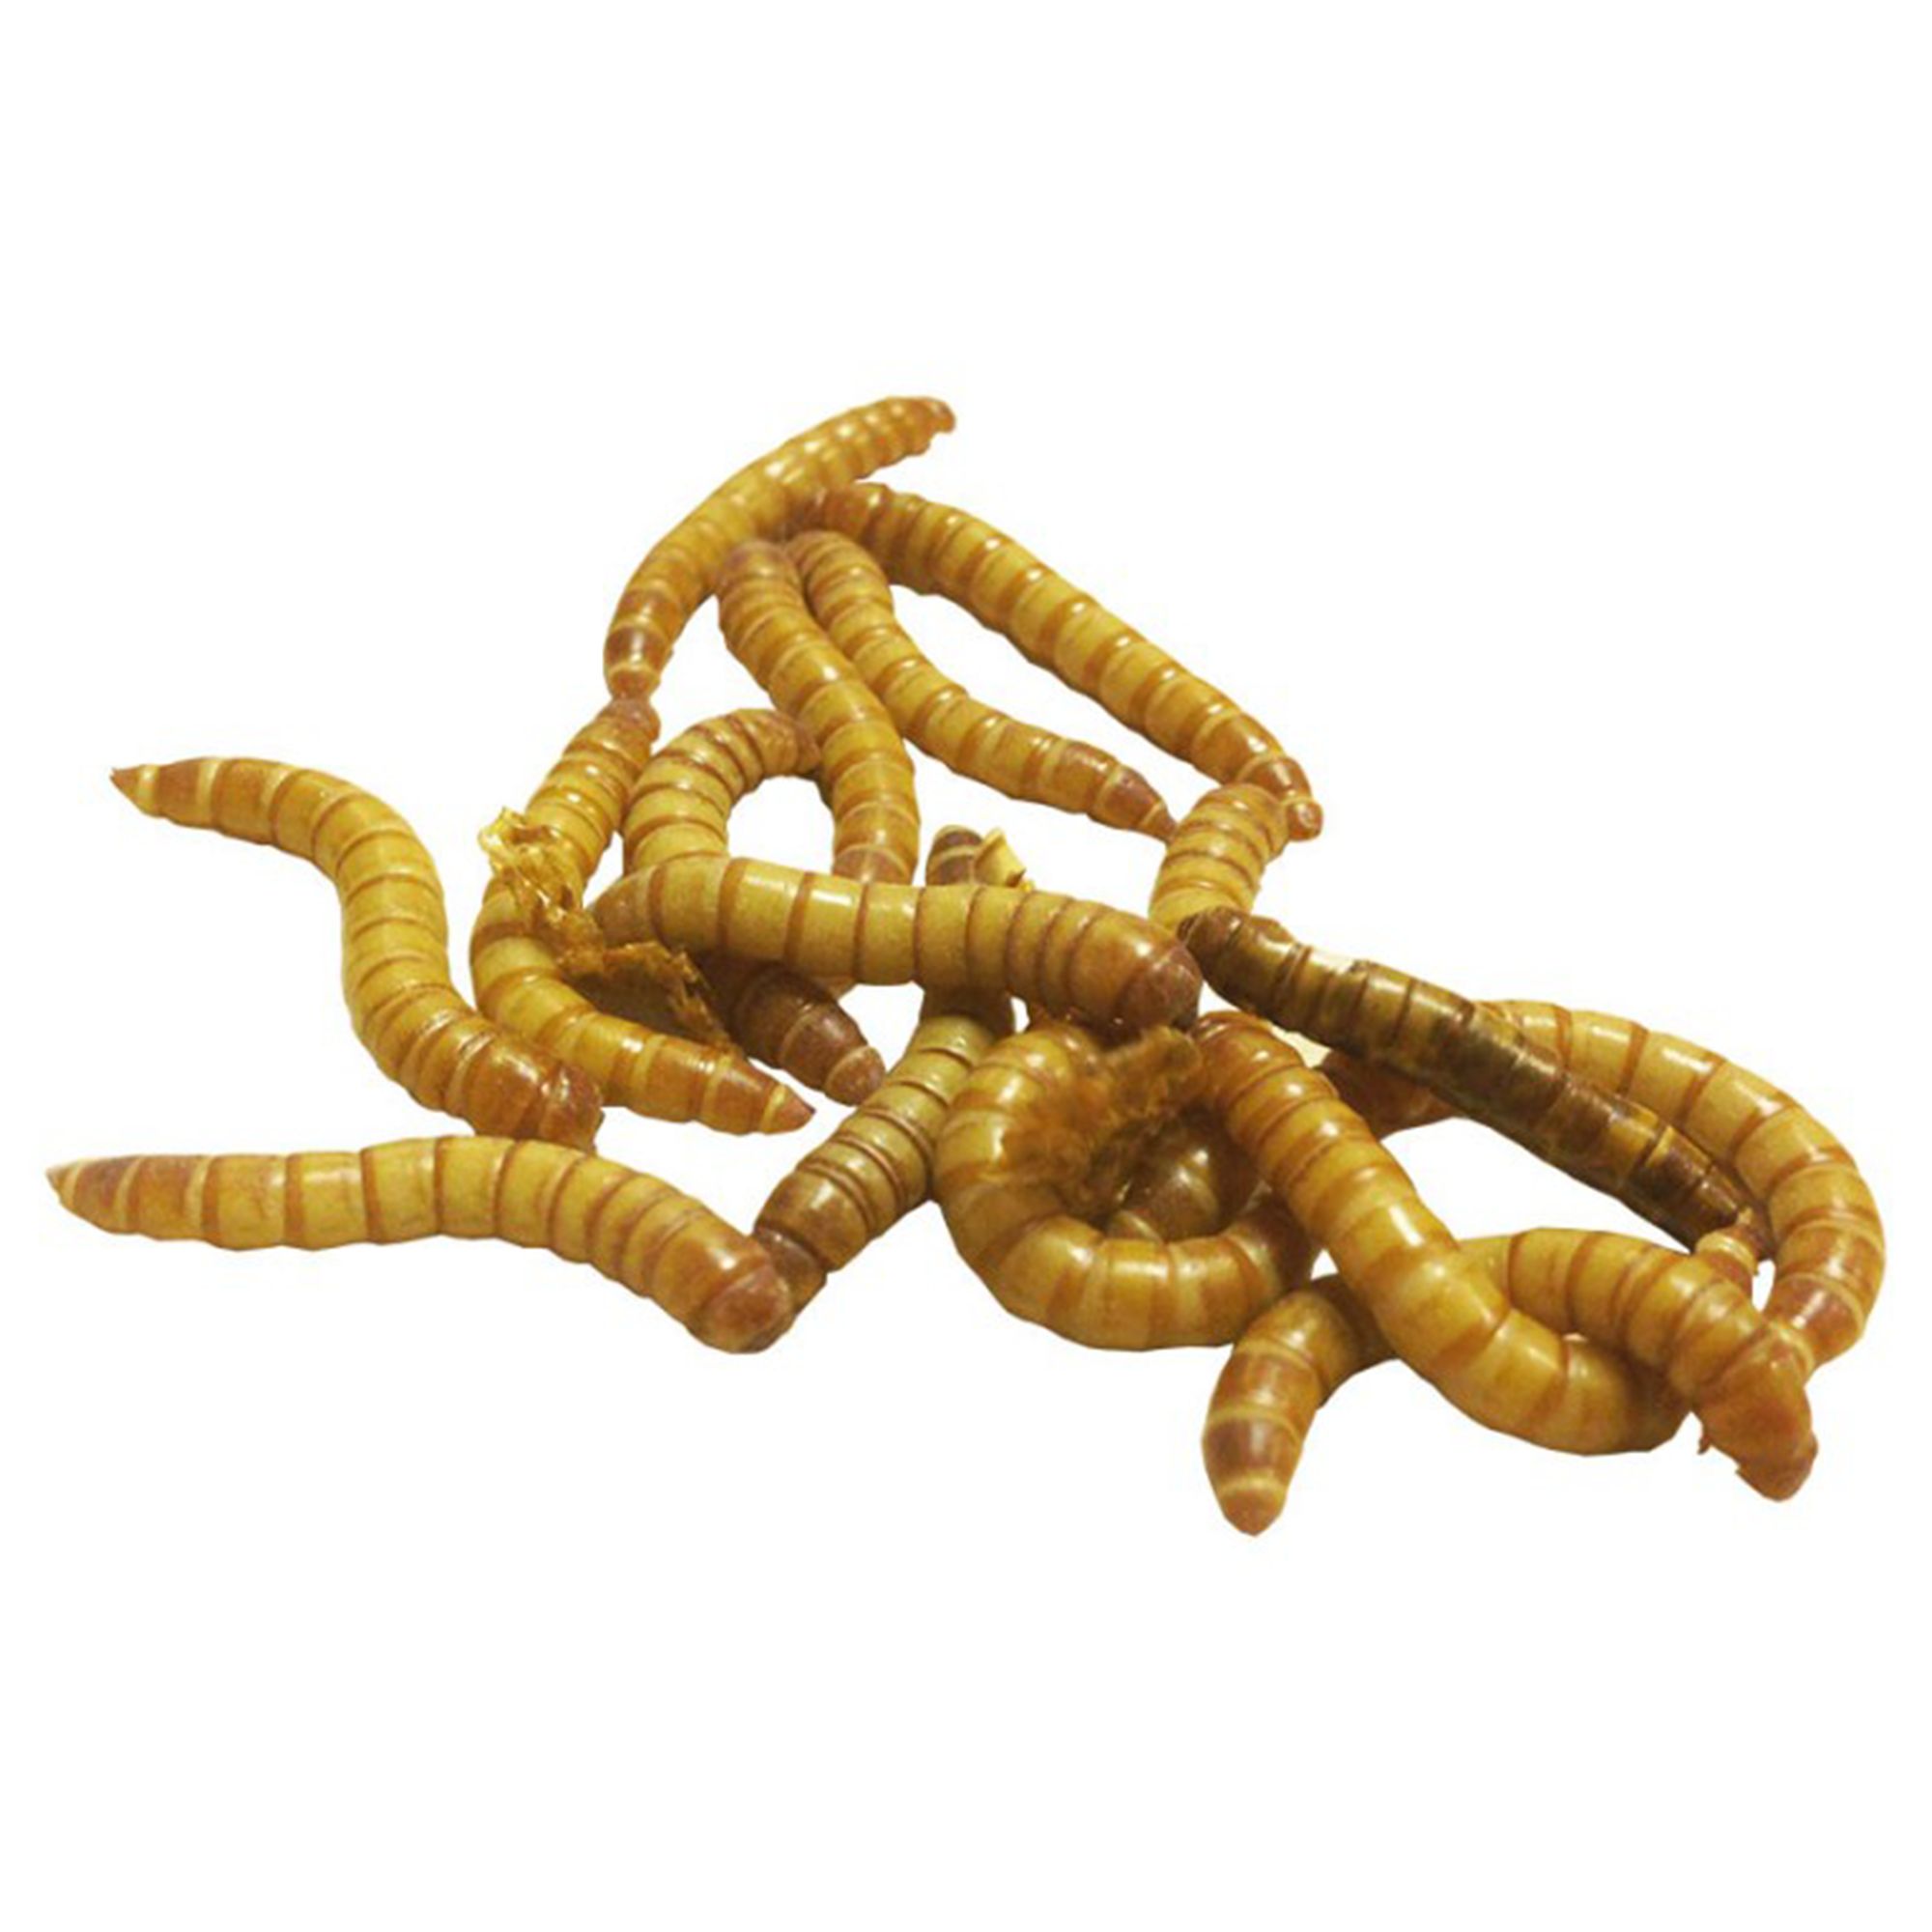 are dried mealworms bad for dogs